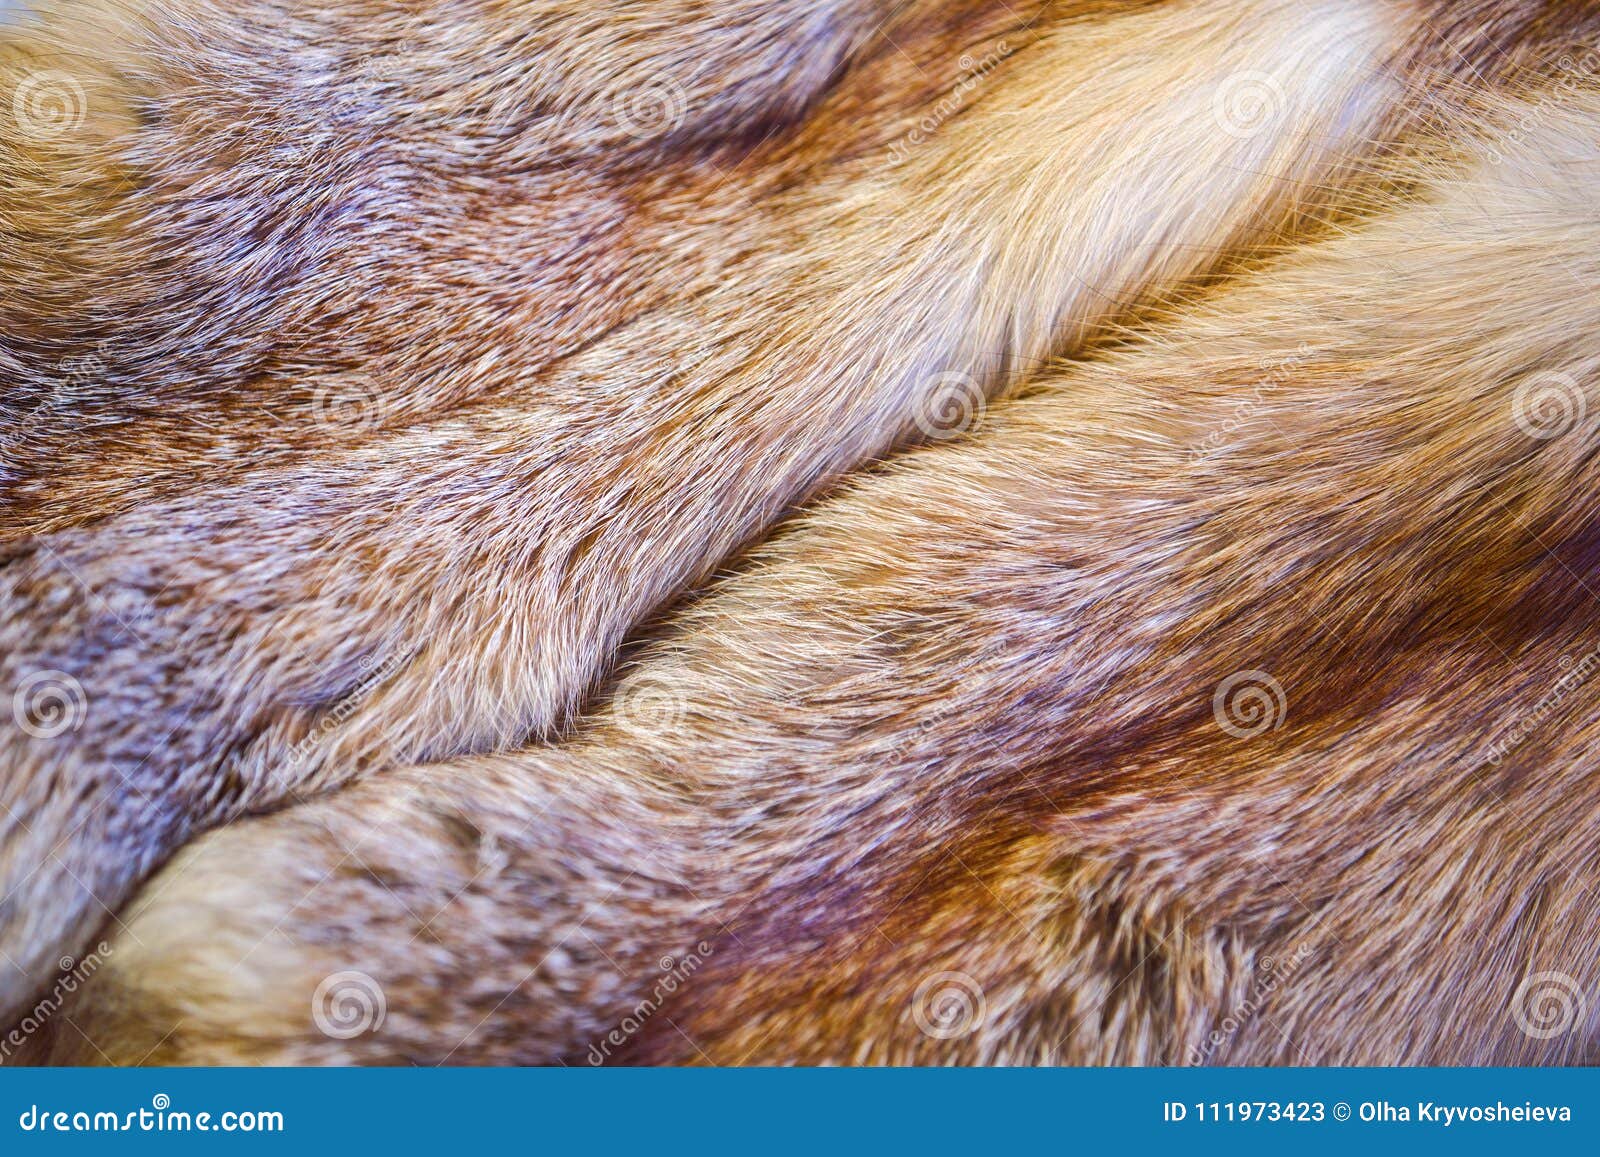 Red Fox Skin. Fox Fur with Pied Beautiful Hairs Stock Image - Image of